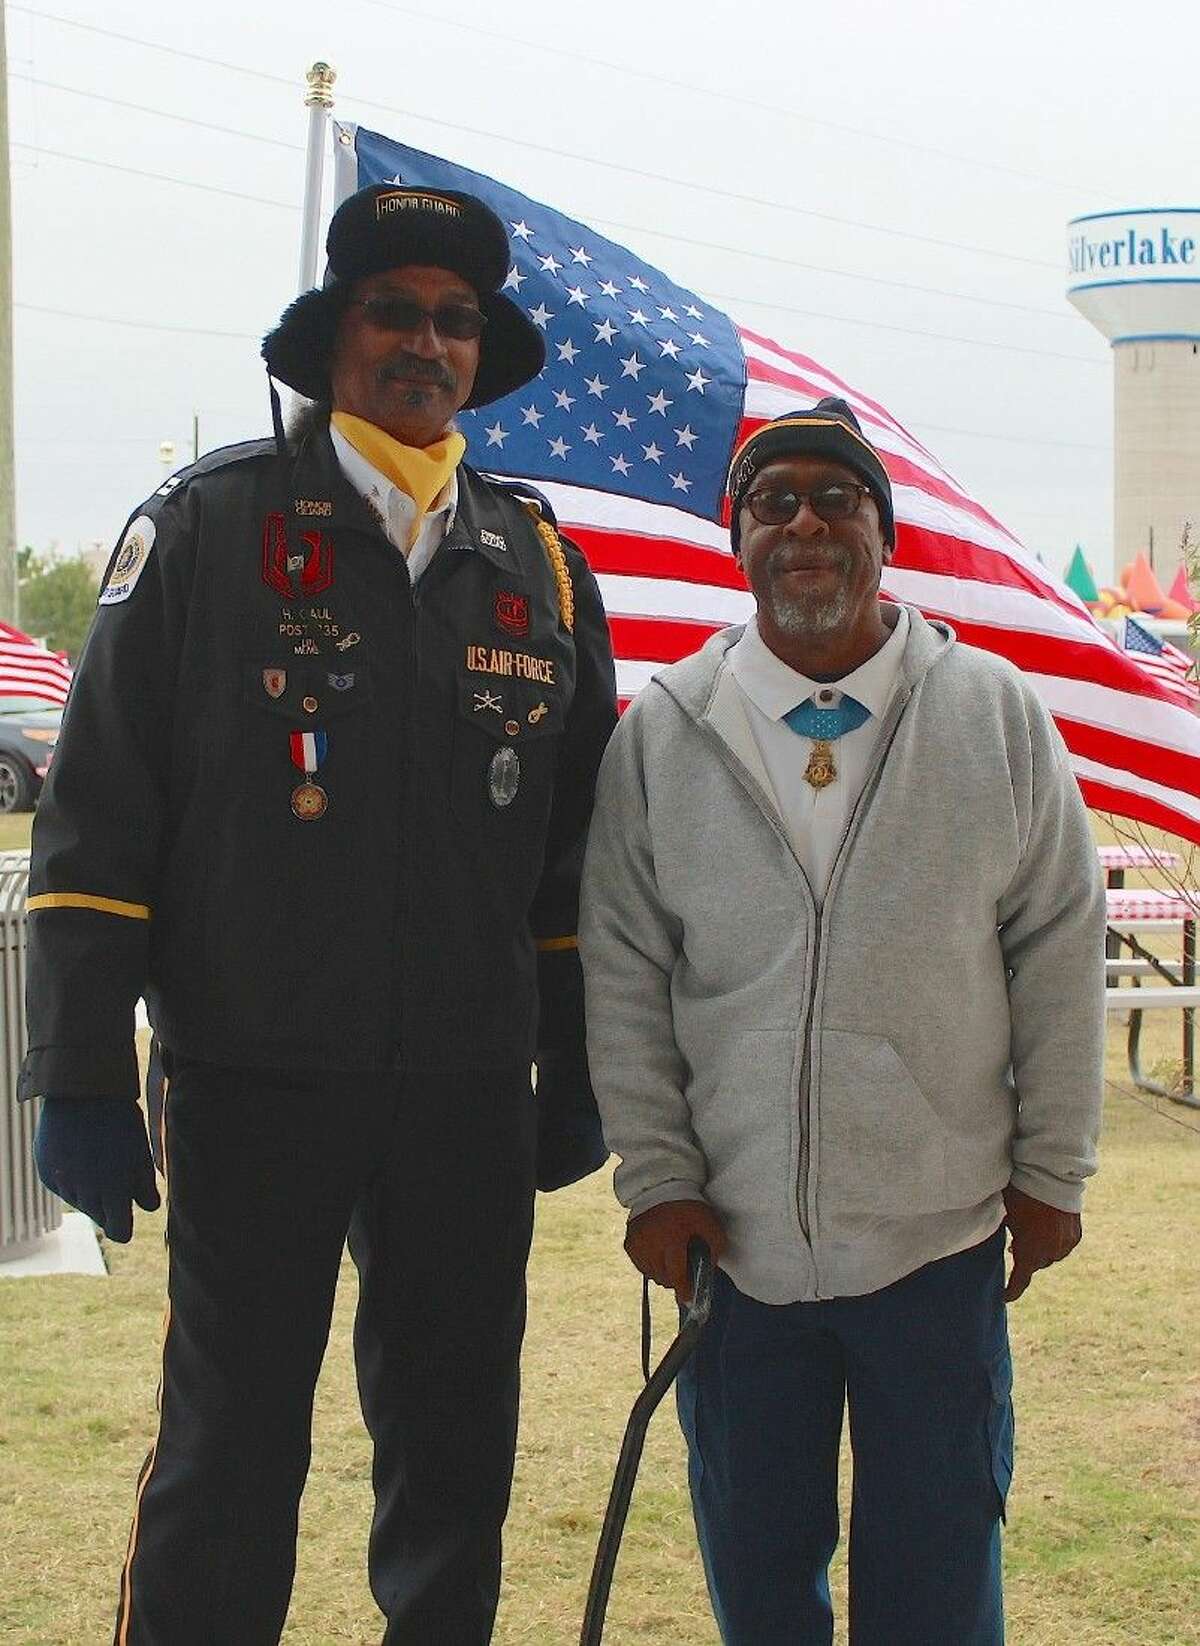 Company Man and Brazoria County Combined Honor Guard representative Harry Gaul with Clarence Sasser.